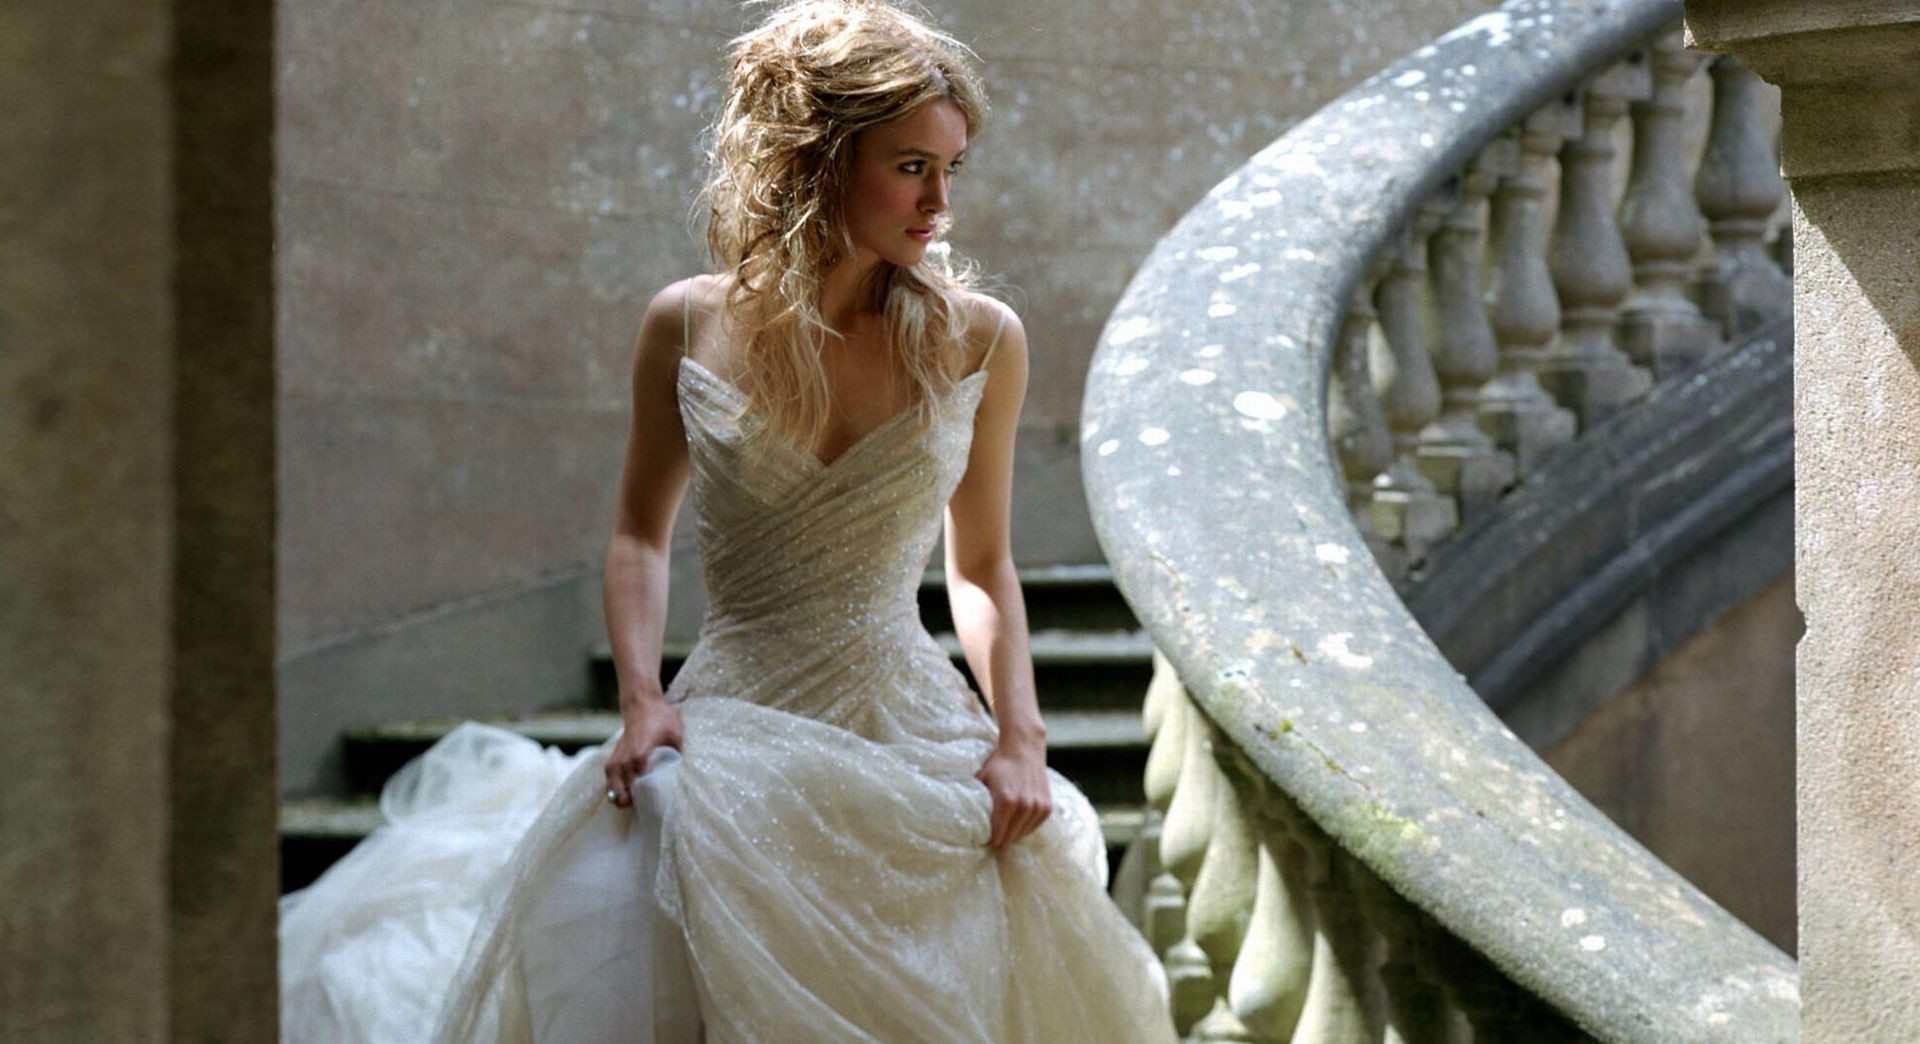 People 1920x1044 Keira Knightley women gown actress dress white dress stairs long hair celebrity